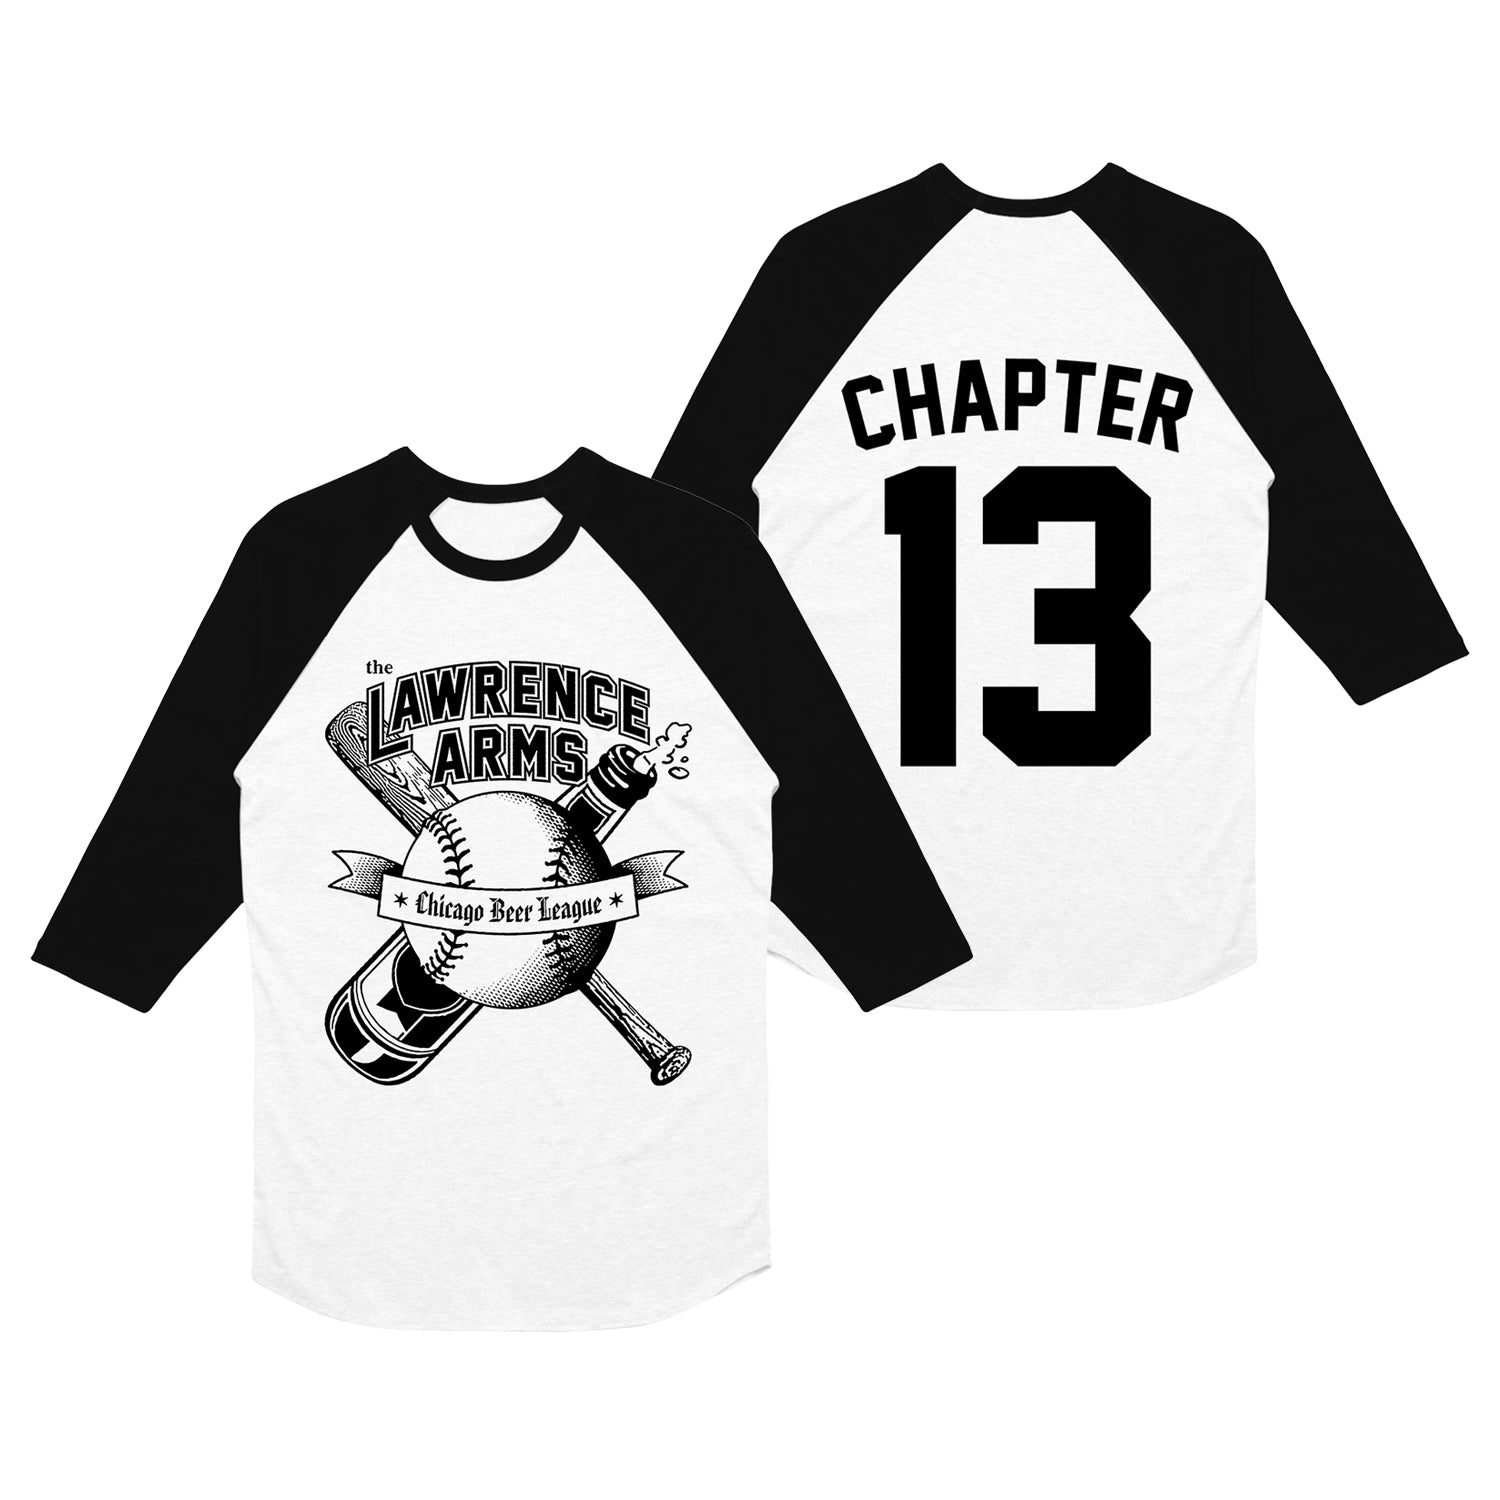 Image of the front and back of a black and white baseball tee against a white background. The front of the shirt says The lawrence arms in black text with a white outline. Below that is an image of a baseball with a bat and beer crossing over each other behind the baseball. There is a banner over the baseball that says Chicago beer league. The back of the shirt says Chapter 13 in black text. the 13 is printed largely, like a baseball jersey style. 